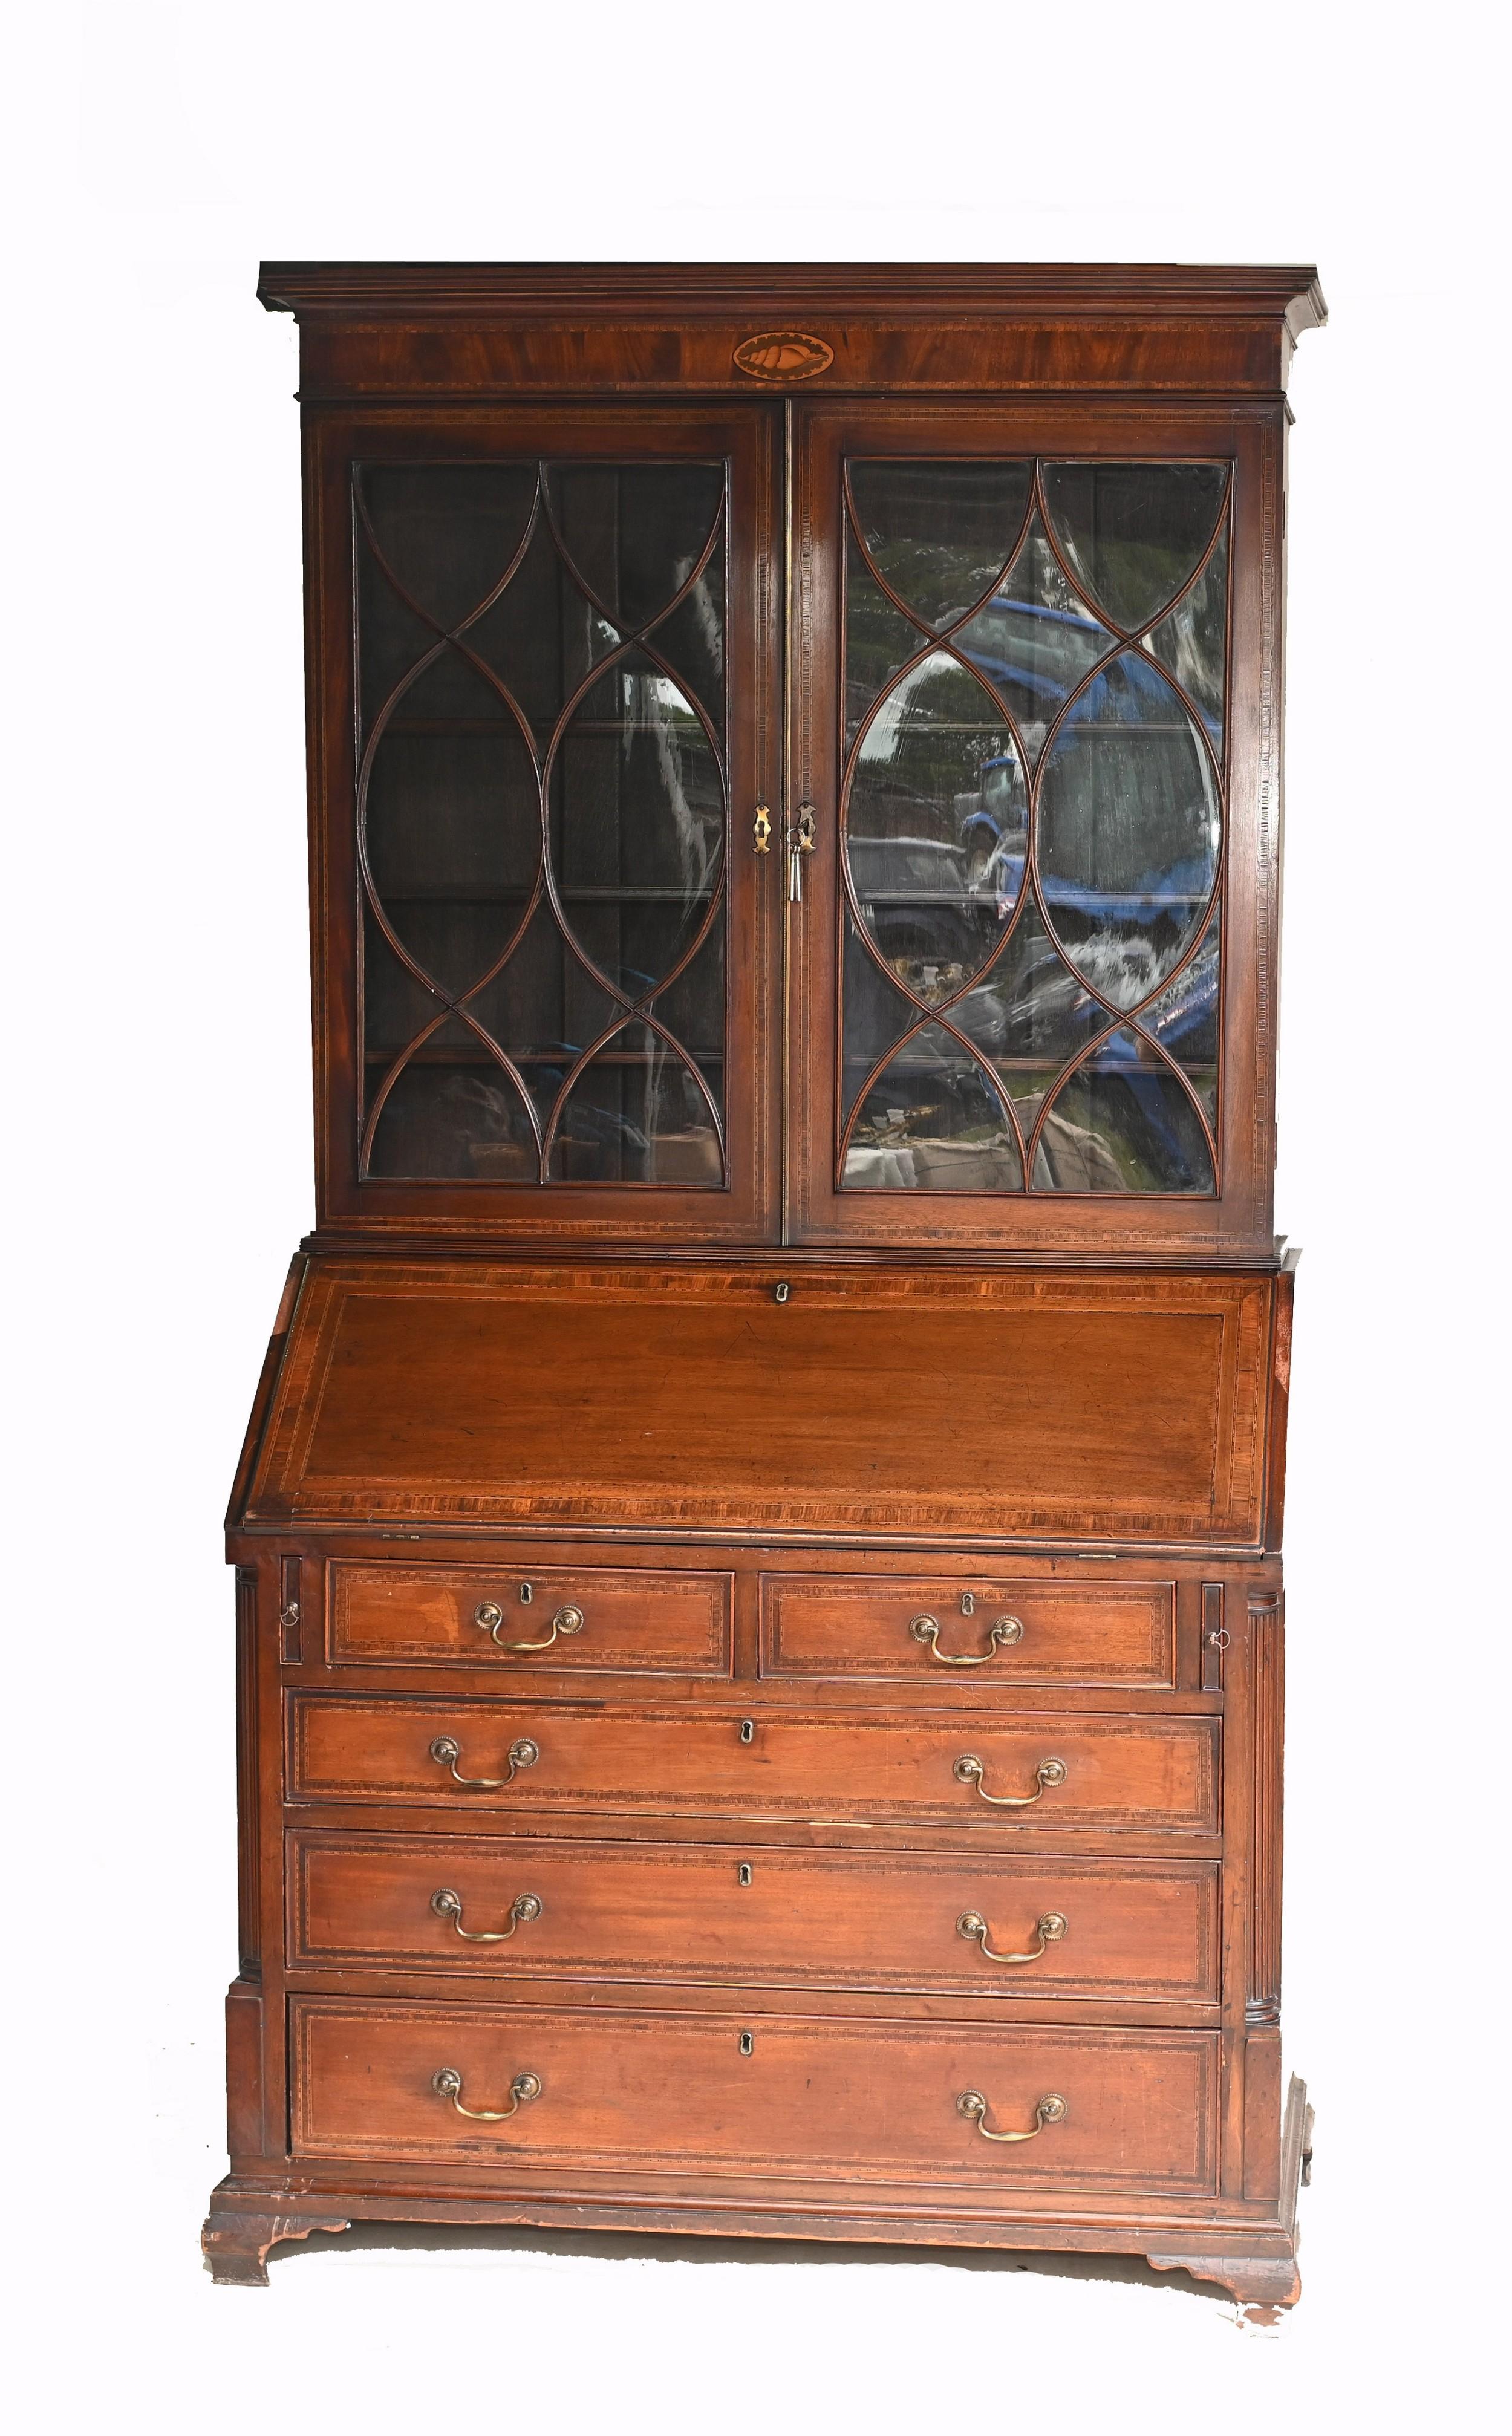 Classic George III bureau bookcase in mahogany
Dates to circa 1790
Both a bookcase and a desk
Practical, elegant and stylish
Some of our items are in storage so please check ahead of a viewing to see if it is on our shop floor
Offered in great